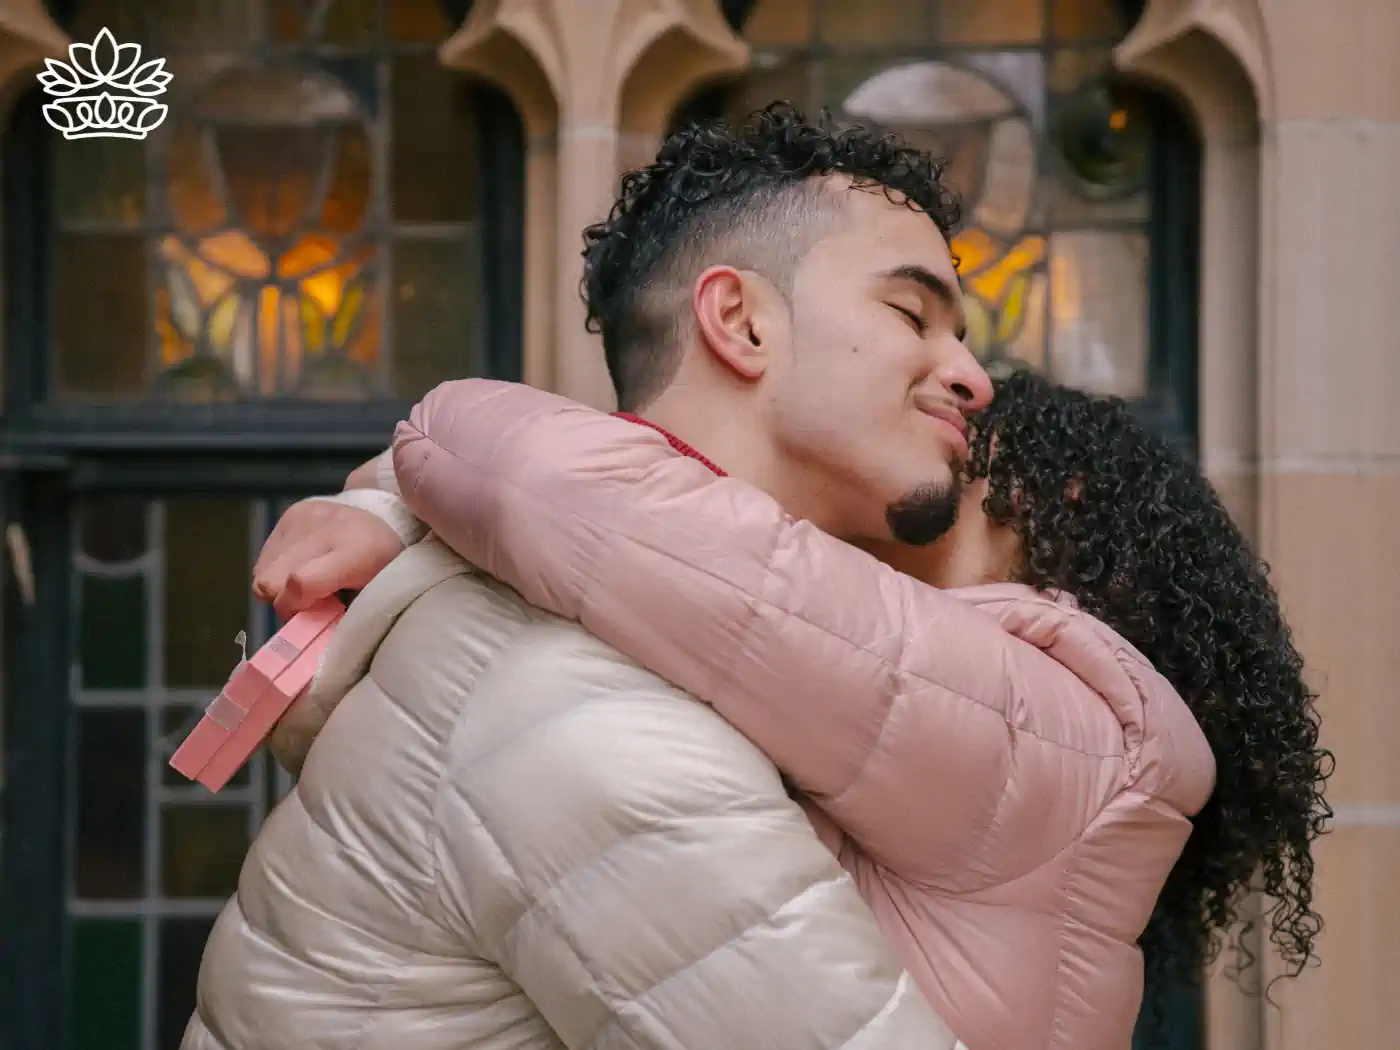 A young man with curly hair hugging a woman with curly hair, holding a pink gift box behind her back, expressing affection and joy. A stained glass window forms the backdrop. 